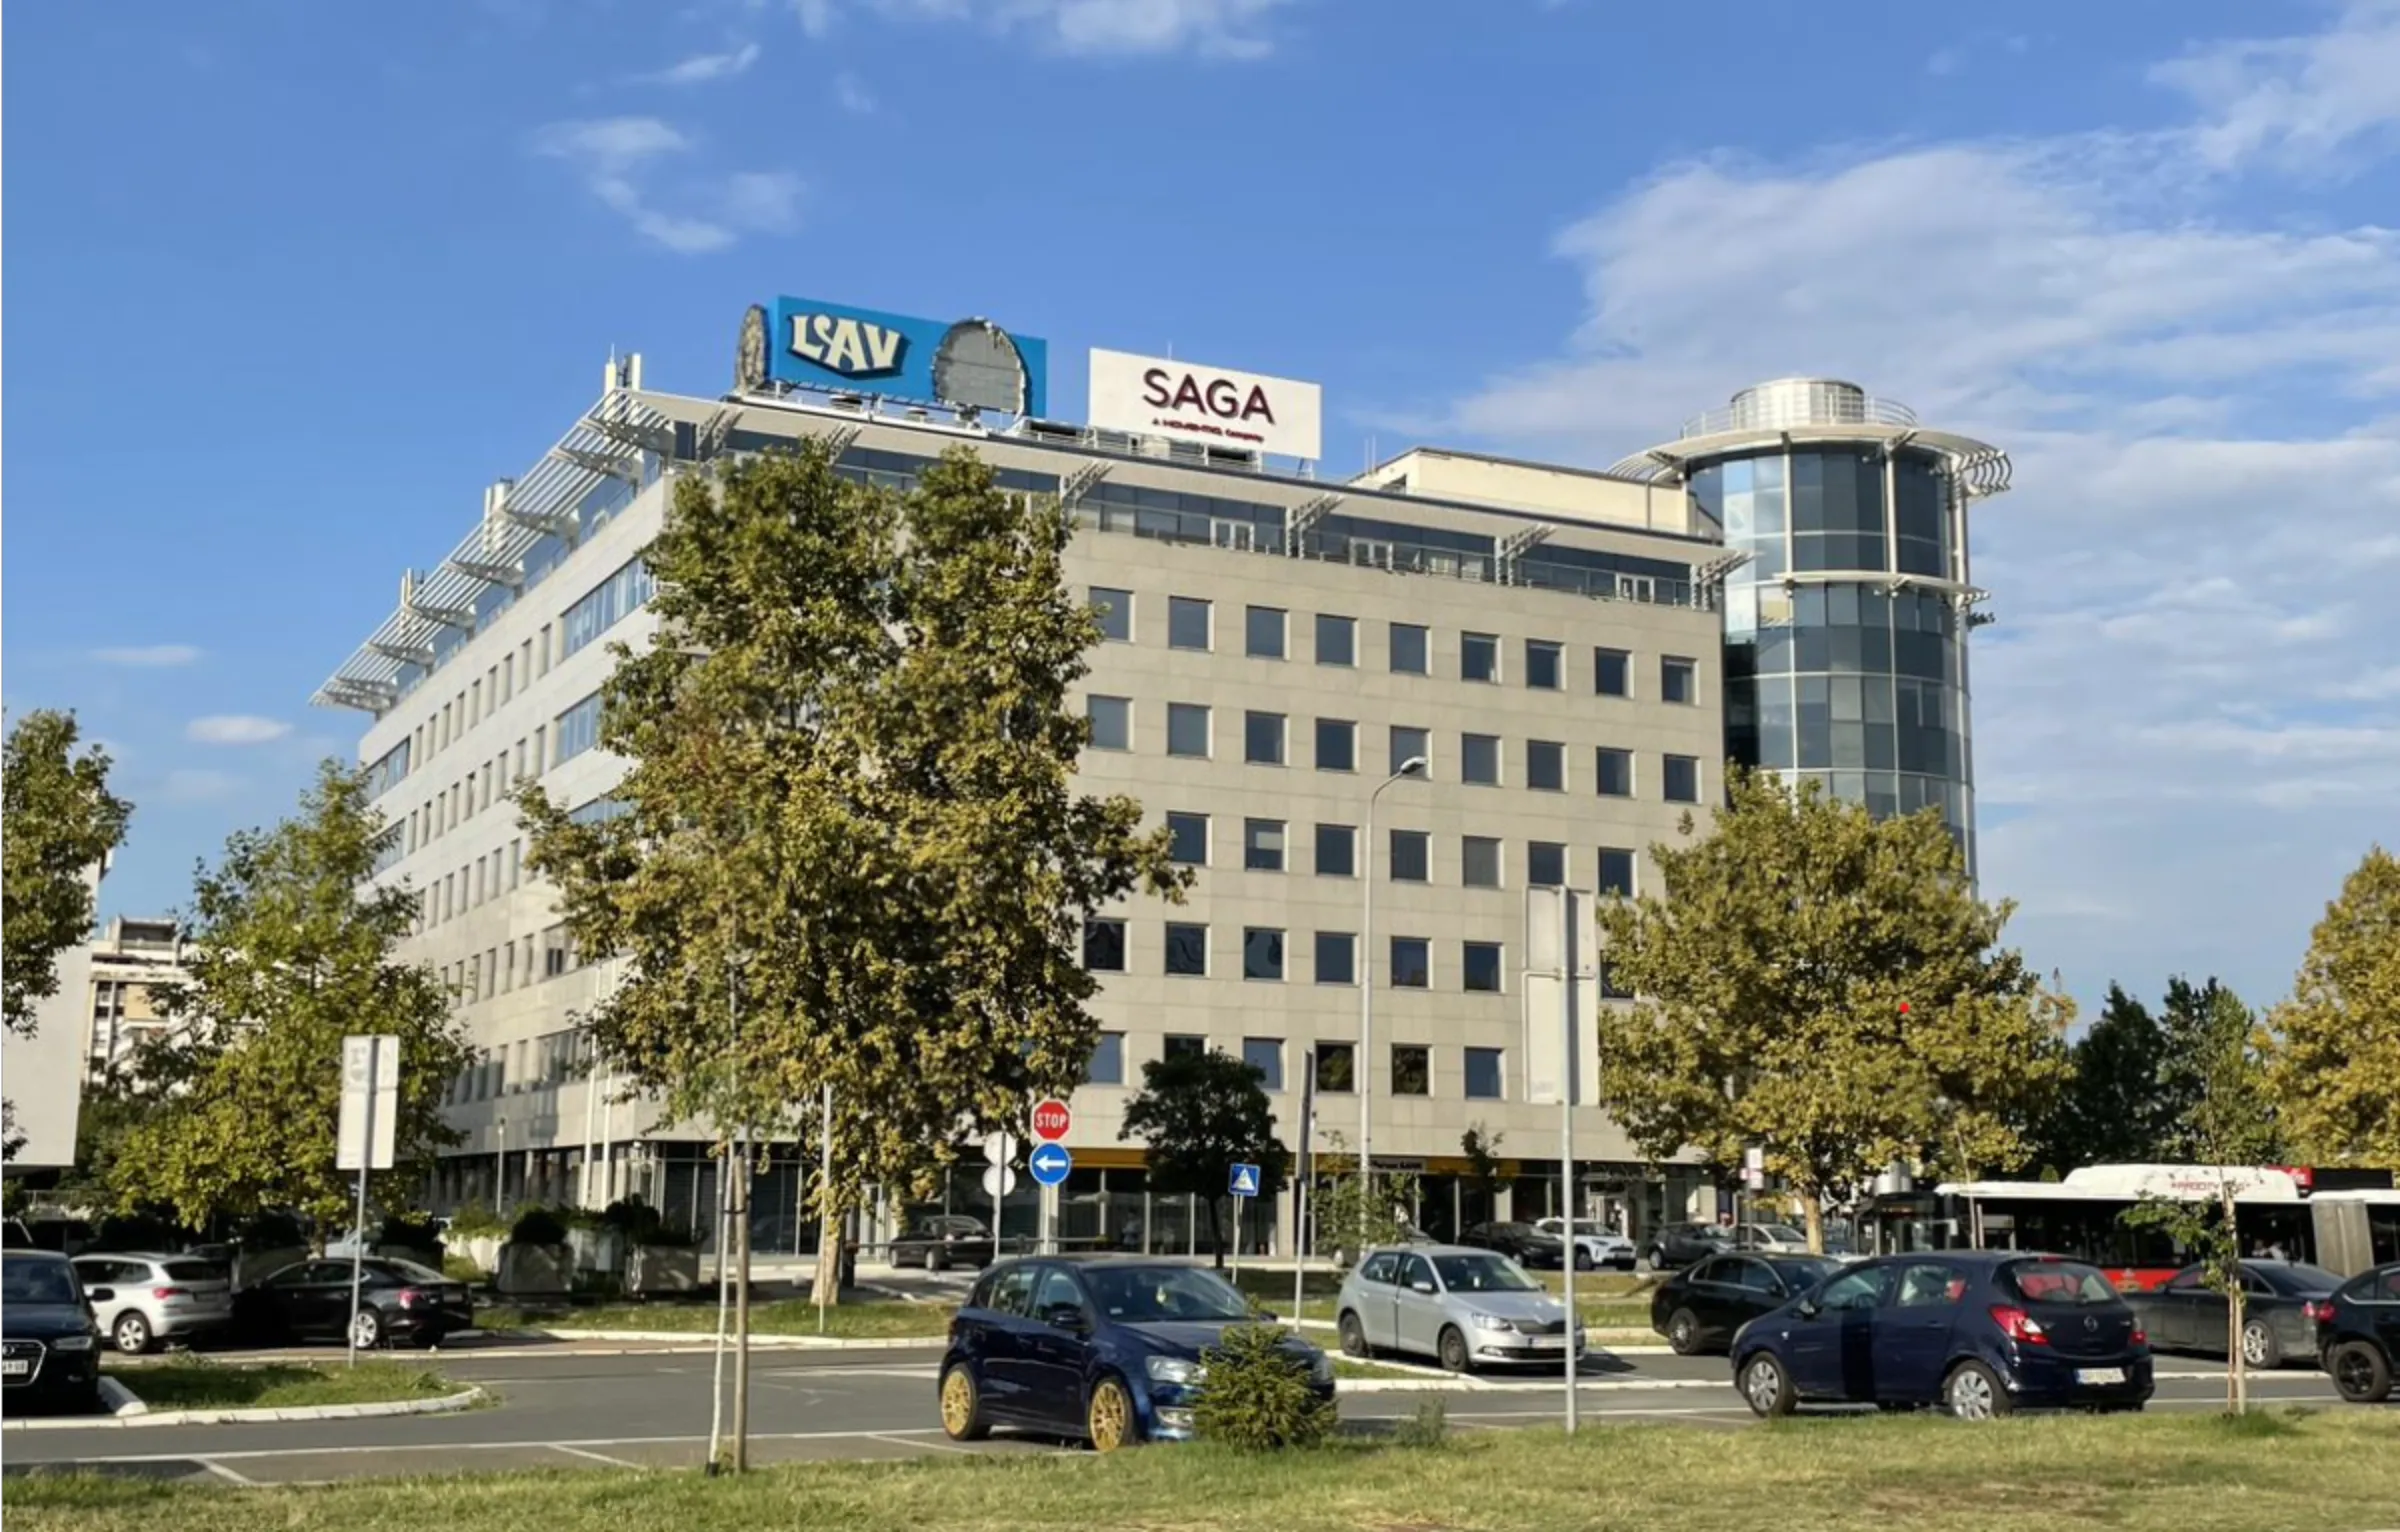 The Belgrade office for Saga, the company which worked with the Serbian government to build its Social Card system. August 10 2023